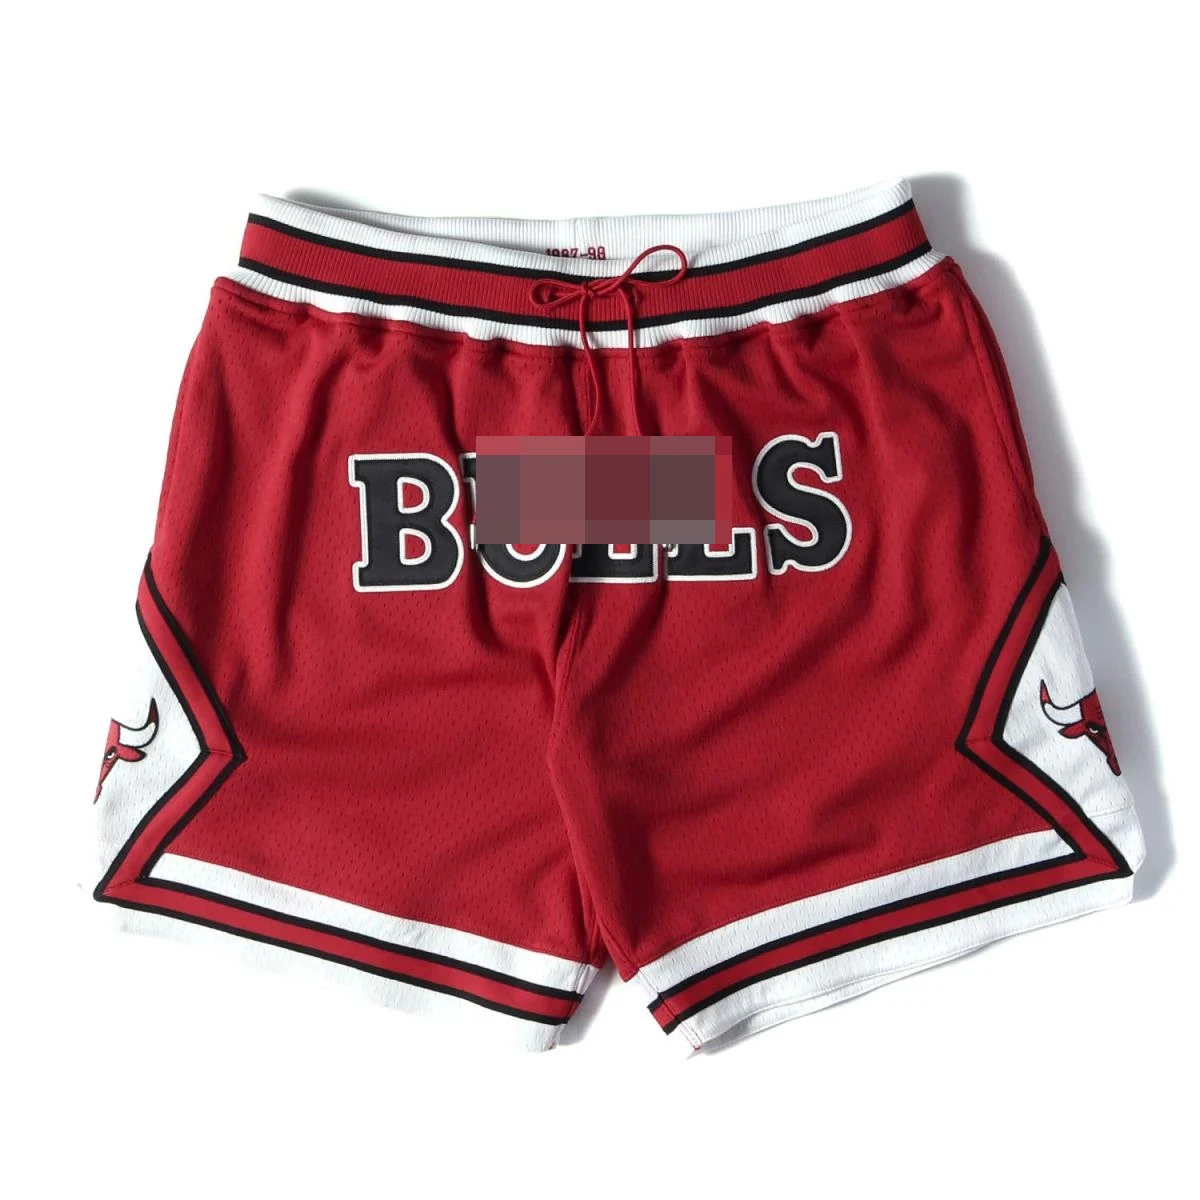 Wholesale Wholesale simple embroidery mens just don basketball shorts red  1992 bulls shorts From m.